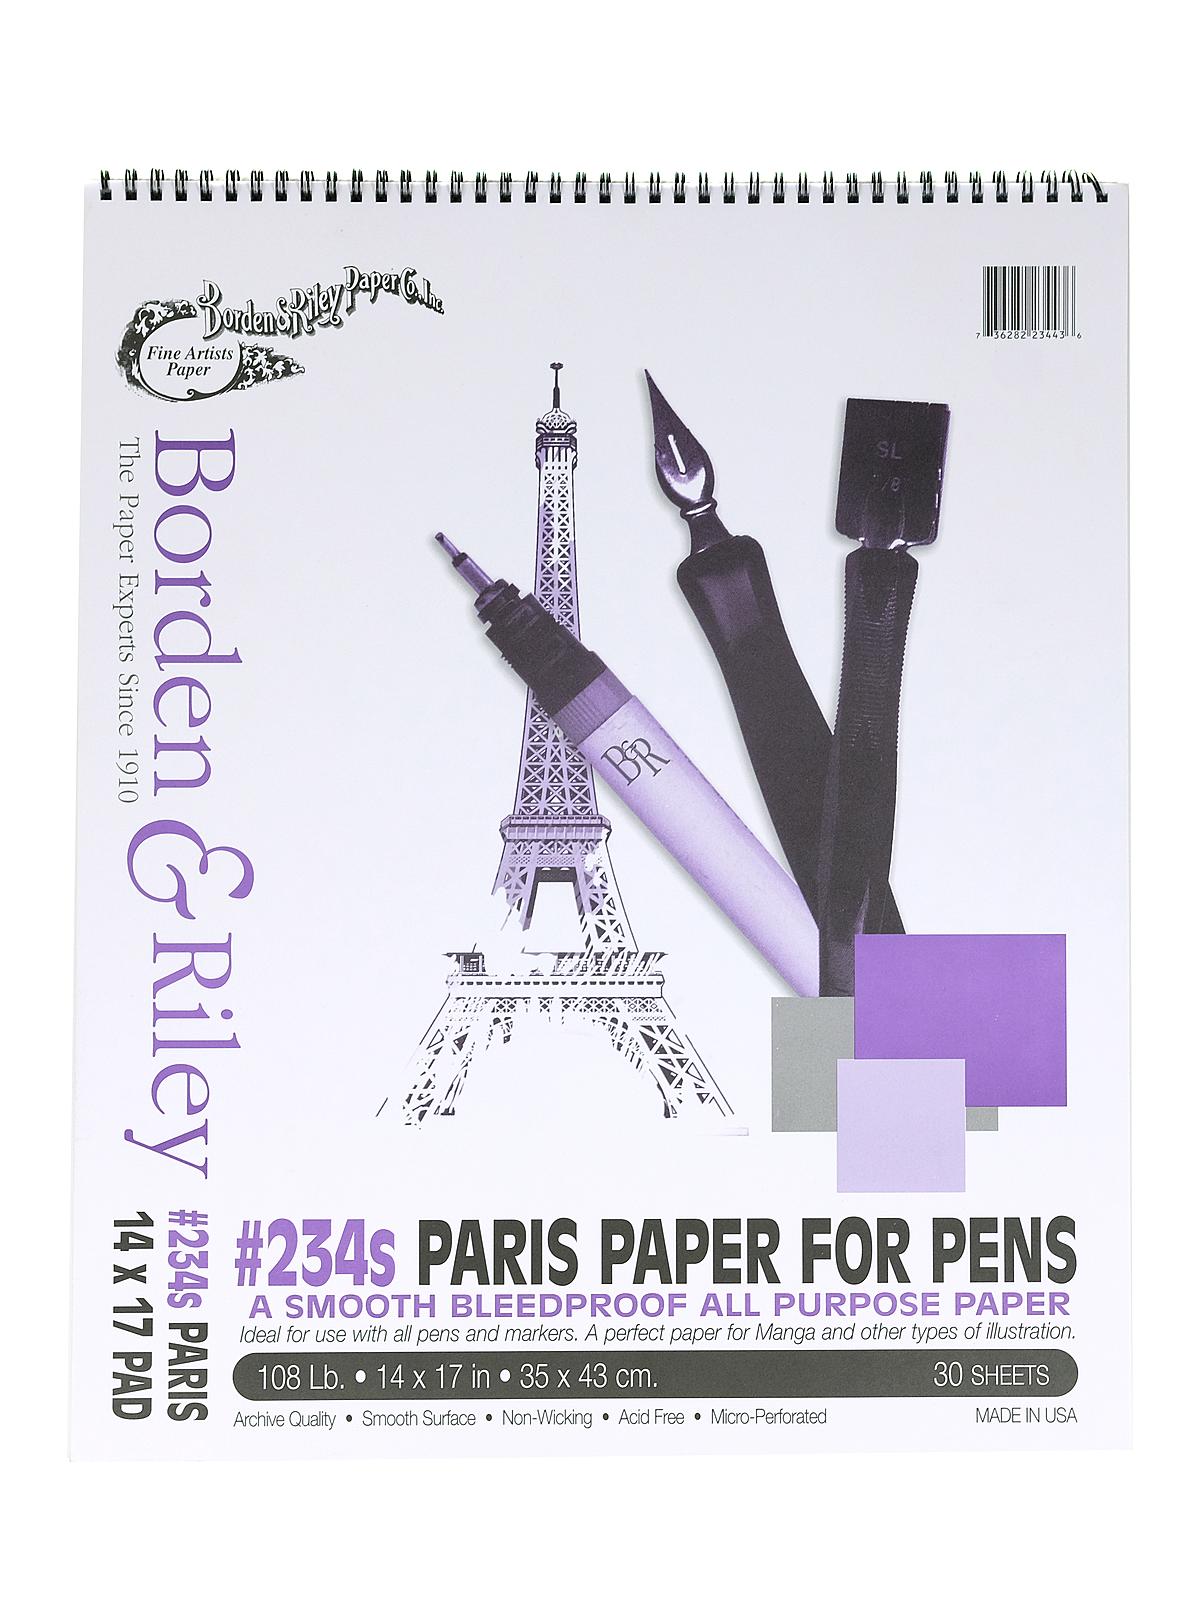 #234 Paris Bleedproof Pads 14 In. X 17 In. 30 Sheets Spiral Bound